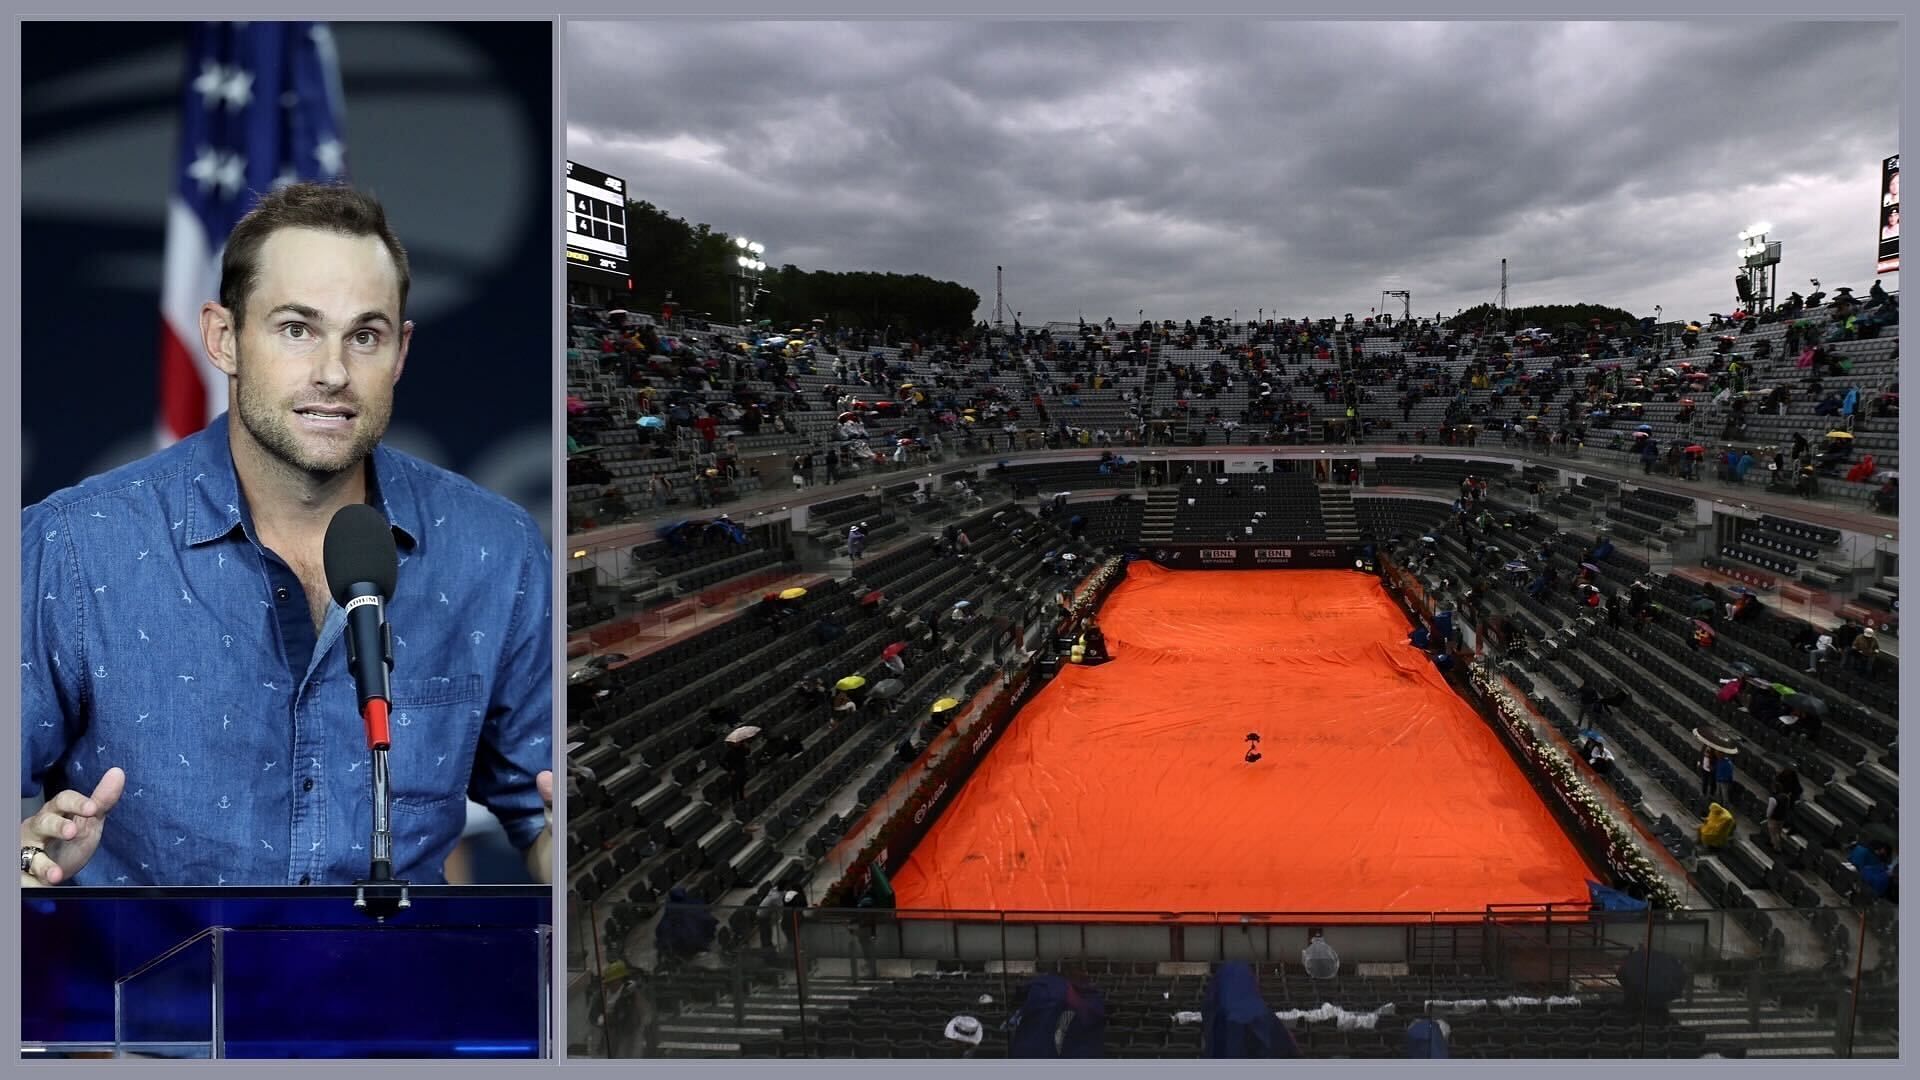 Roddick speaking about the effect of rain affected matches on tennis players